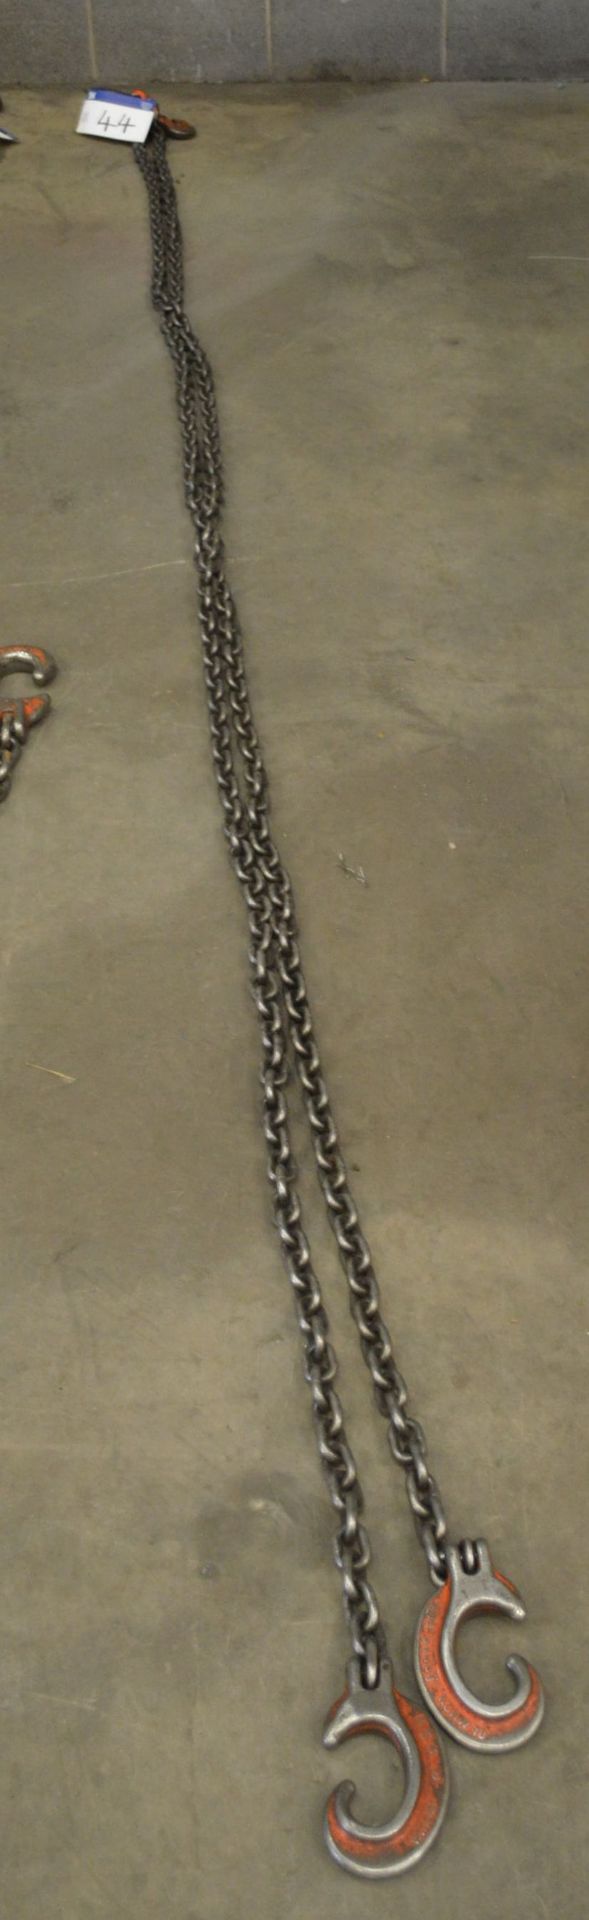 Pewag Two Leg Chain Sling, approx. 4m long, with tensioners